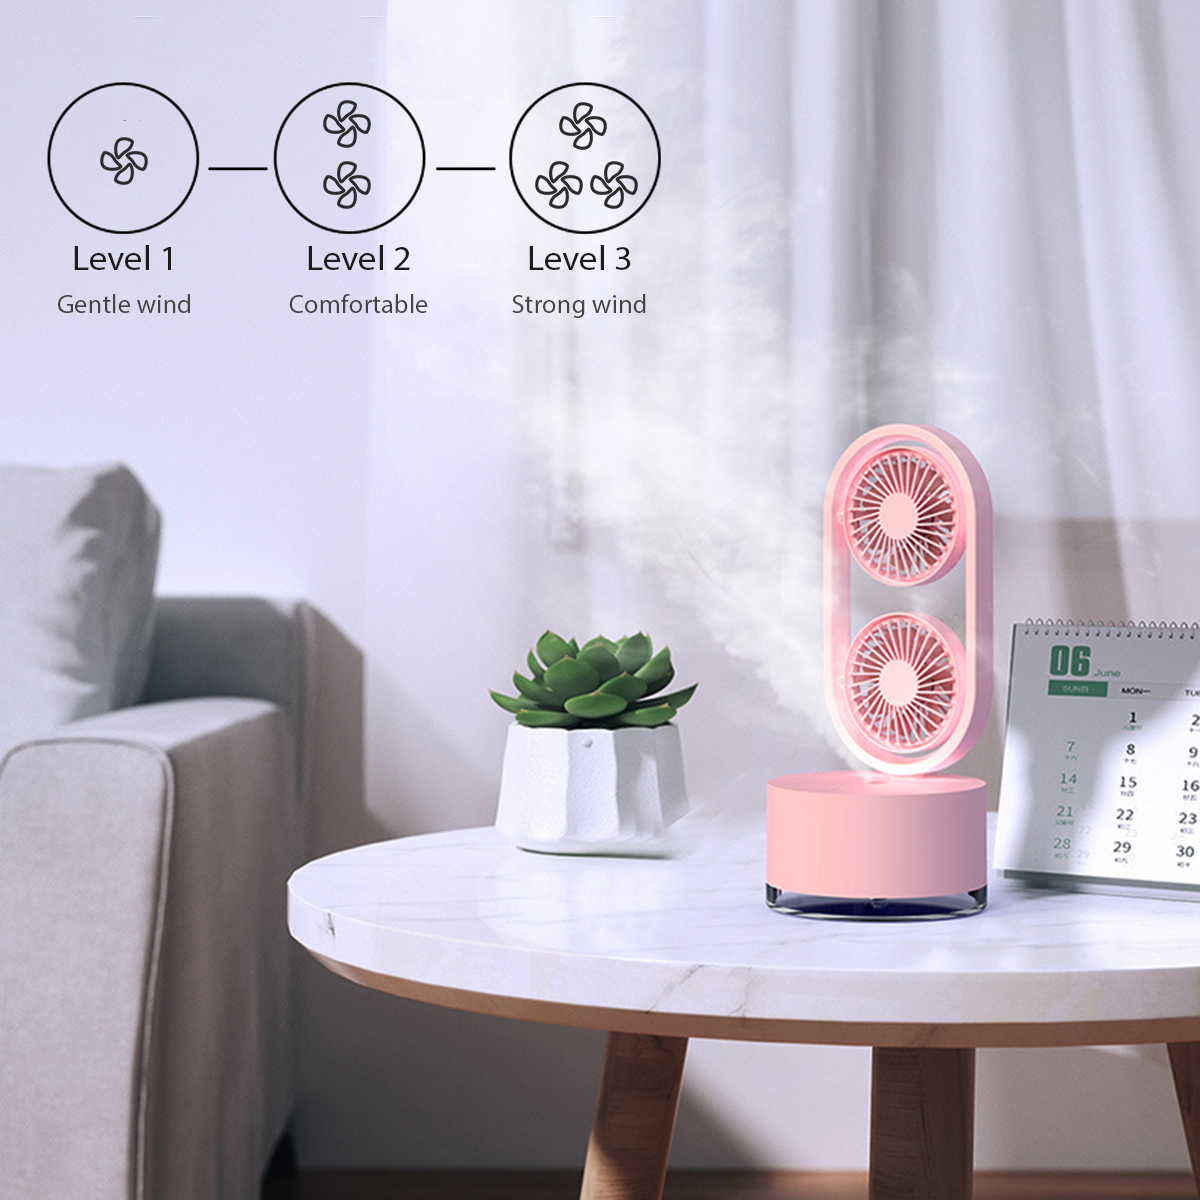 Mini-Dual-Head-Fan-3-Speeds-USB-Rechargeable-Air-Condition-Fan-400ml-Water-Tank-Spray-Humidification-1846006-3